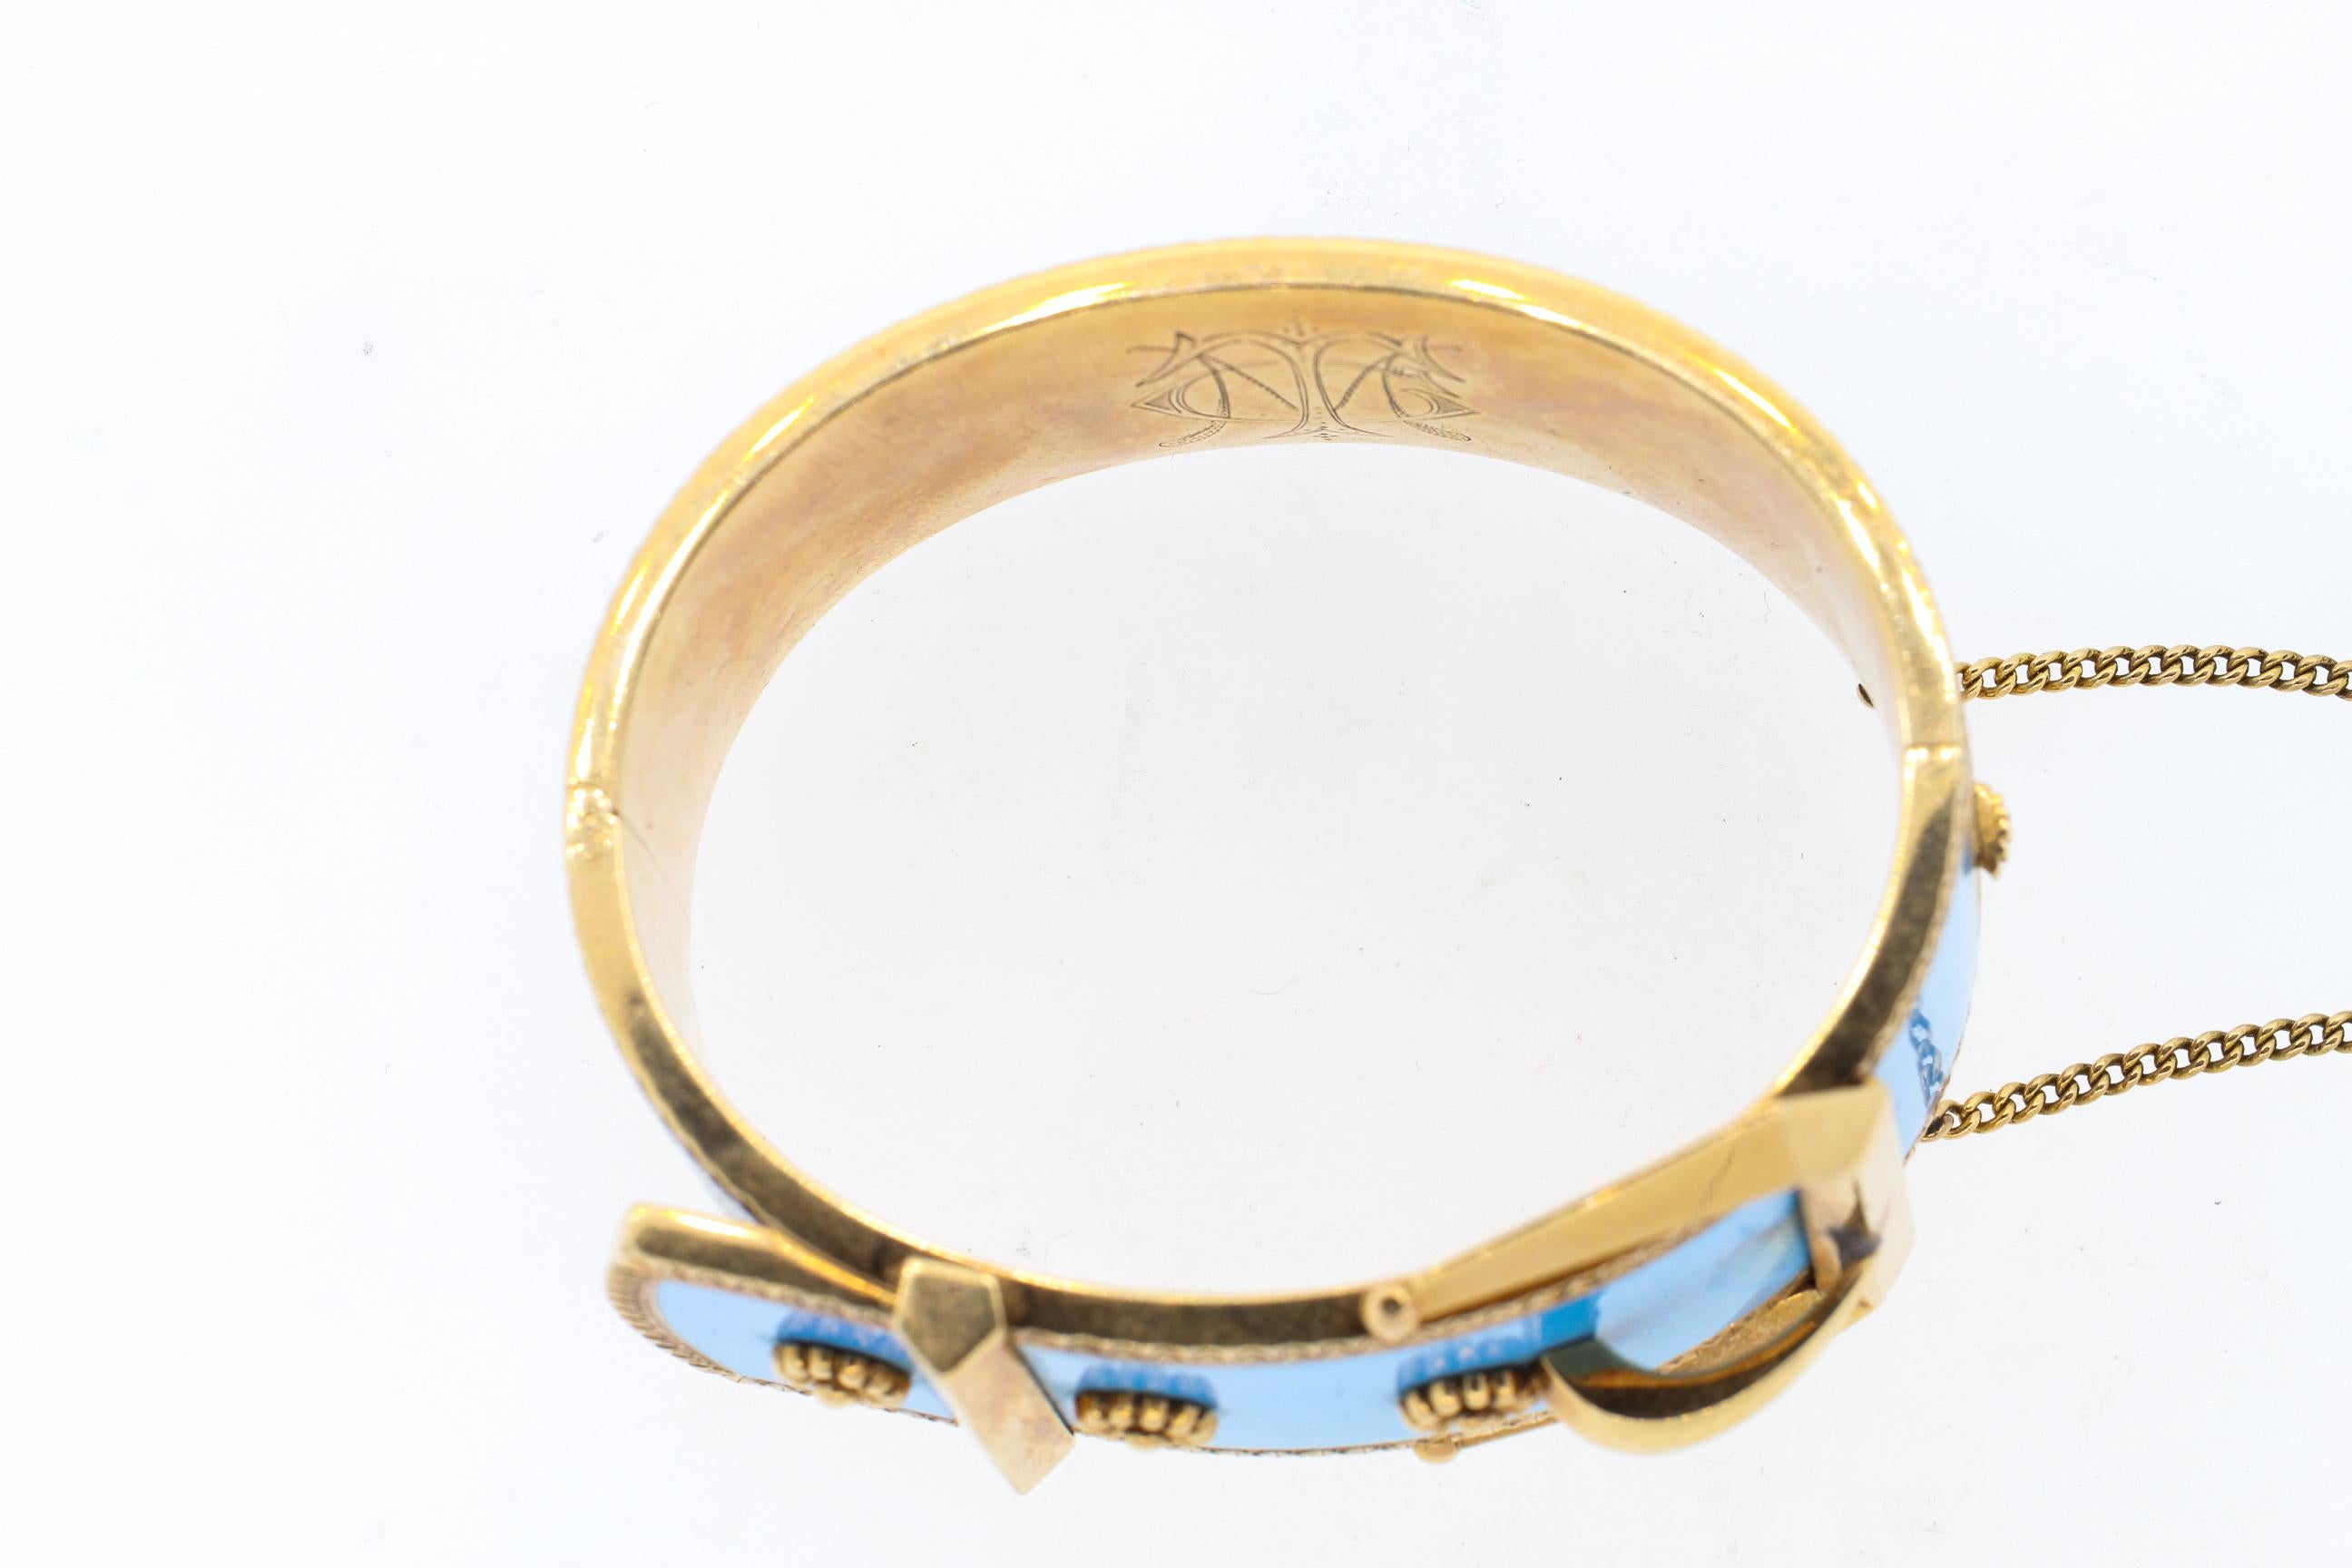 High Victorian wide robins egg blue enamel buckle bangle bracelet, circa 1880. This bracelet is in beautiful condition, with no chips to the vibrant turquoise blue enamel. The buckle motif is incredible modern in feel and this bracelet is very